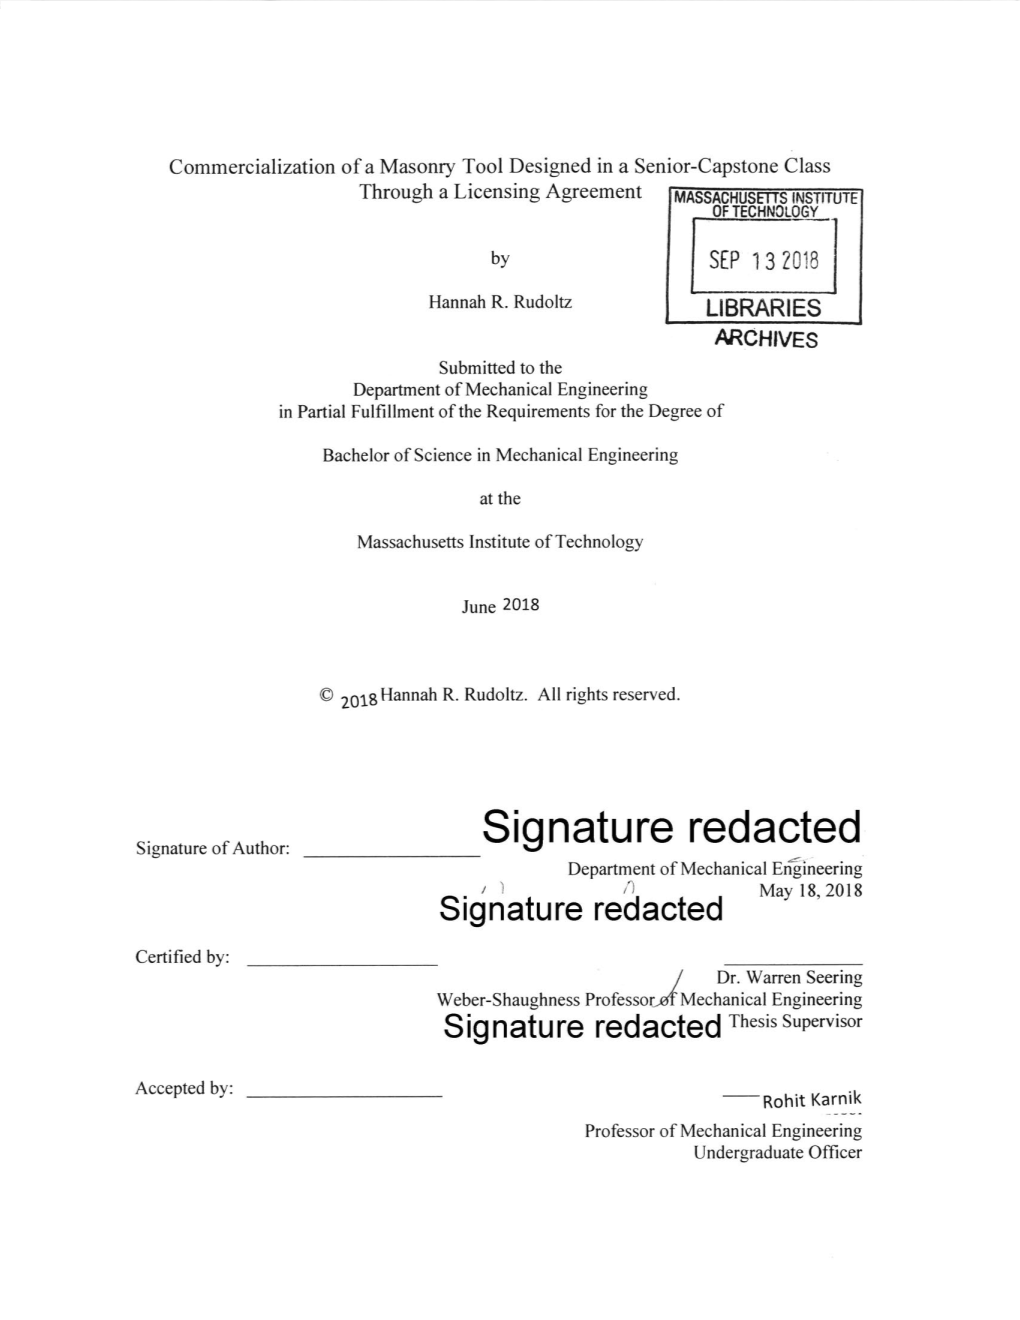 Signature Redacted Department of Mechanical Engineering I) / * May 18,2018 Signature Reaactea Certified By: Dr